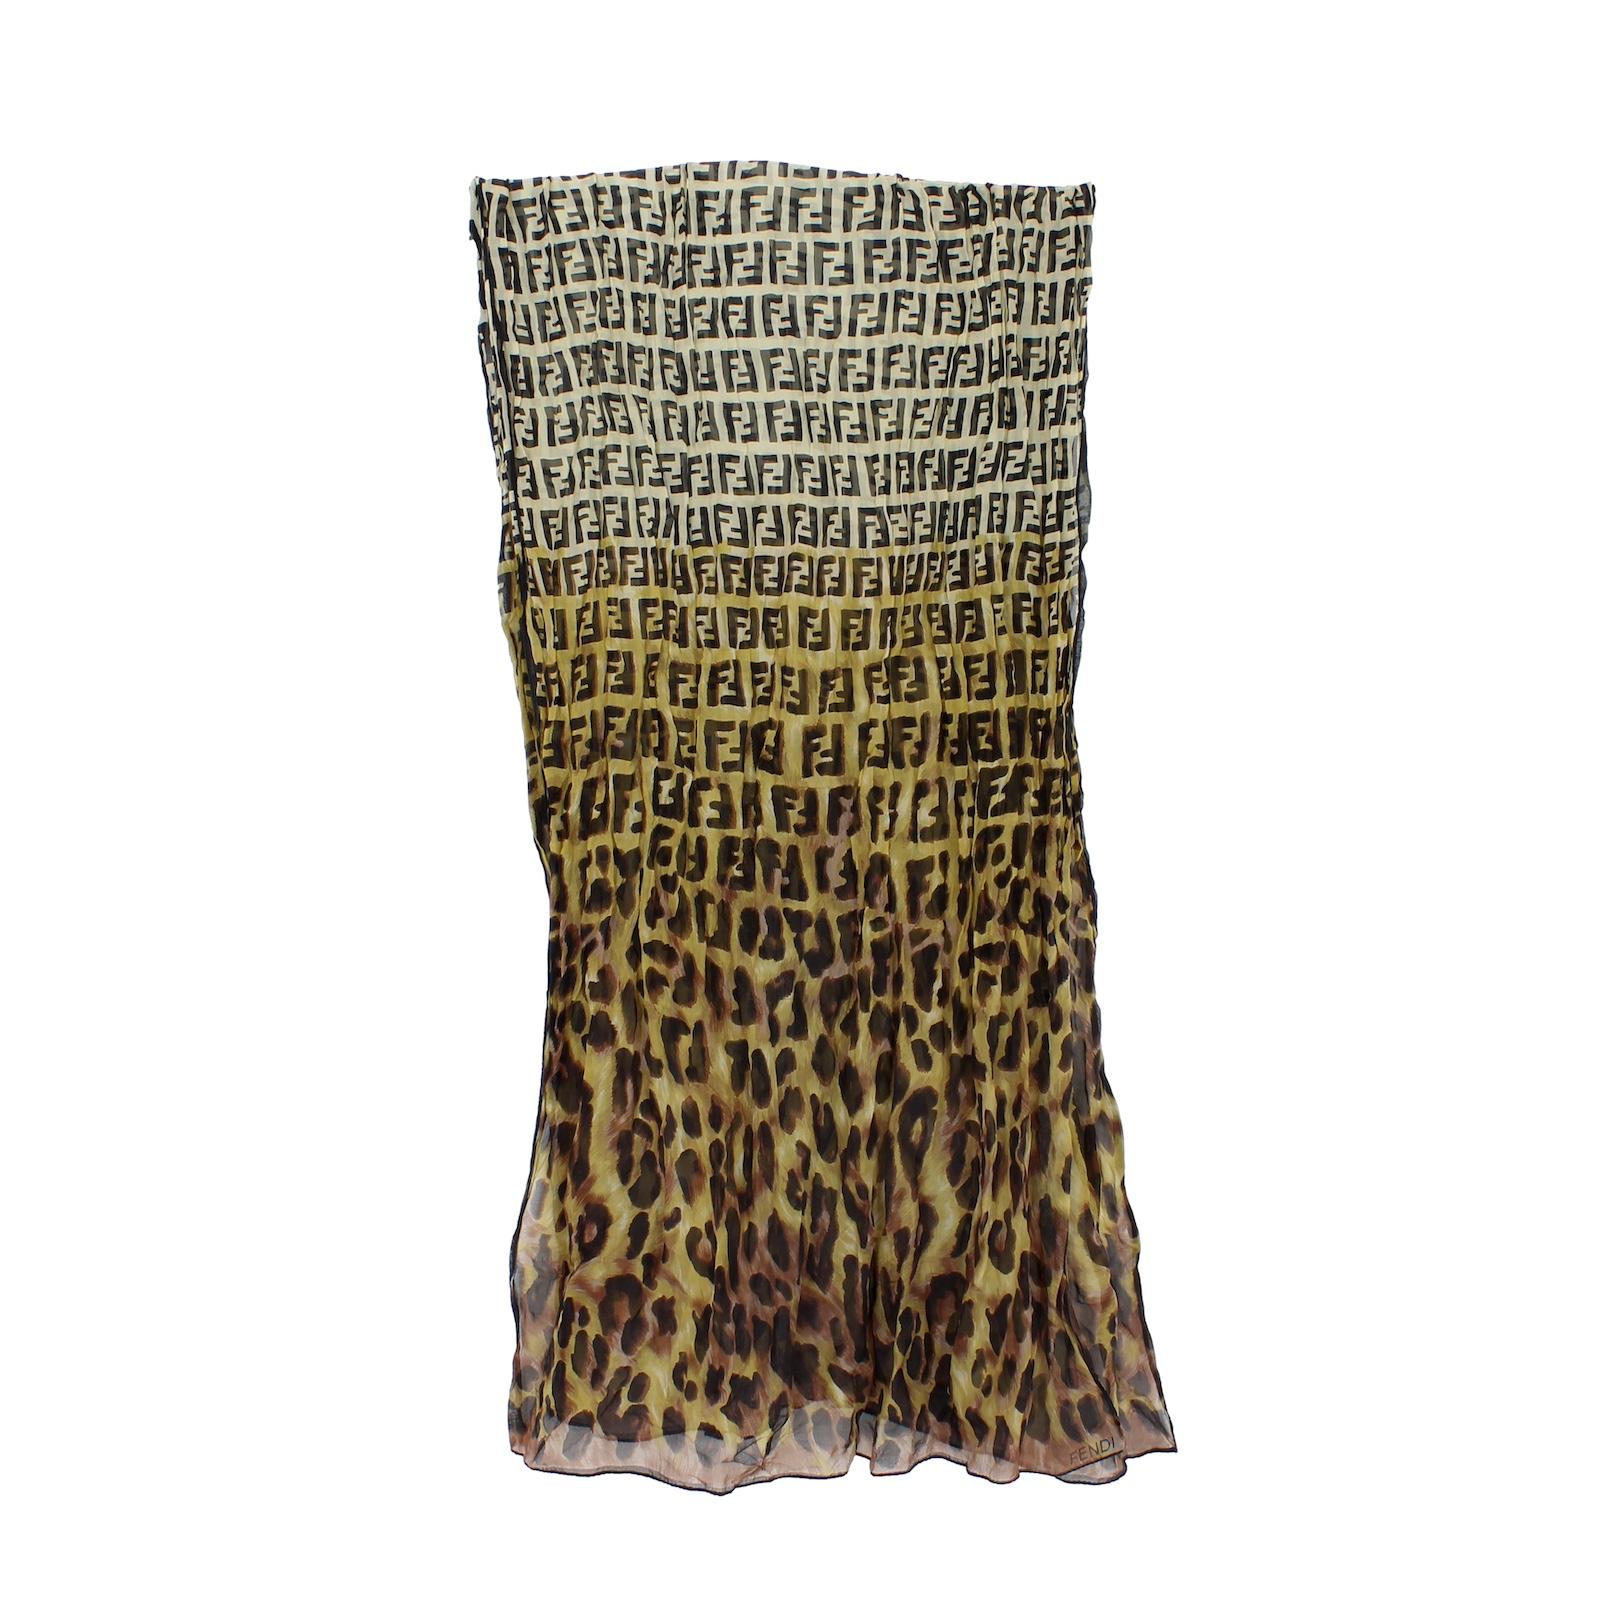 Fendi Zucca animalier scarf 2000s. Large stole with leopard print and monogram, brown and beige color. 100% silk fabric. Made in italy. Label missing.

Measures: 170 x 60 cm


